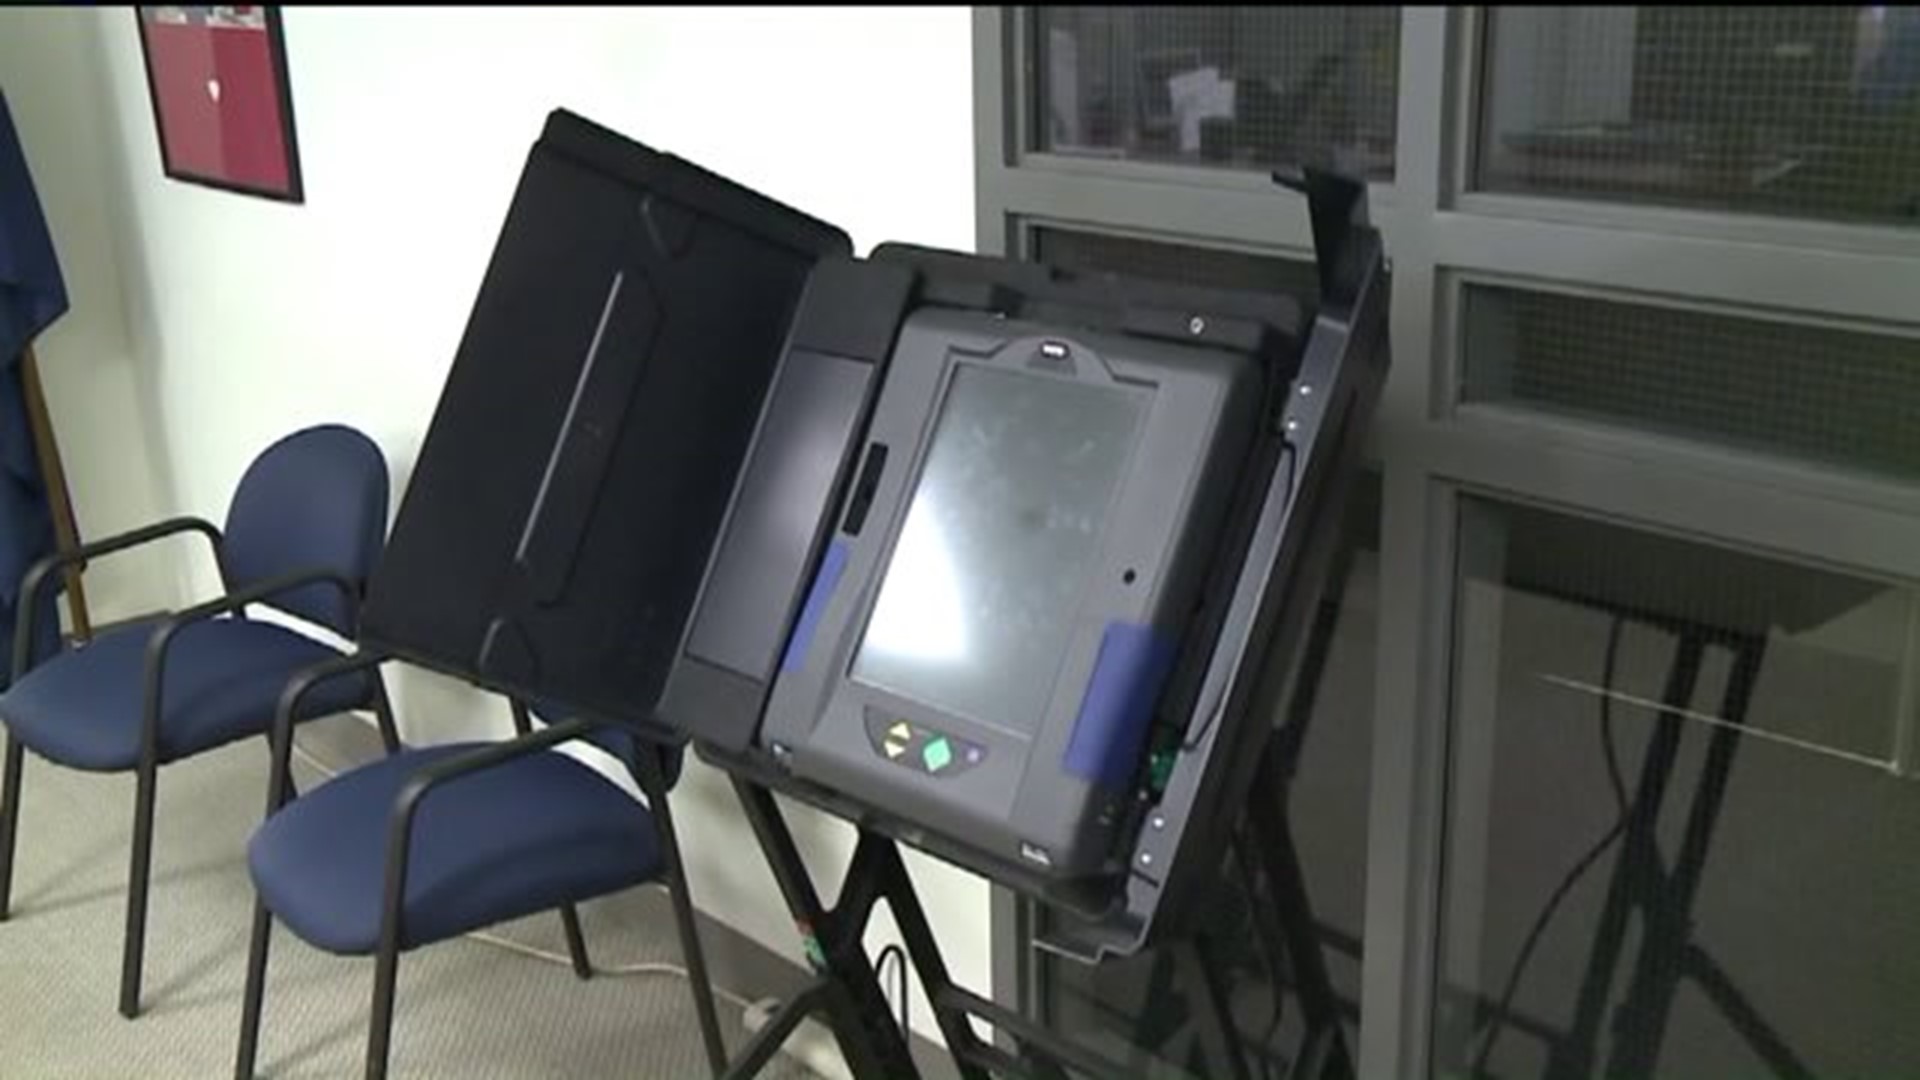 Some Voters Complain of Polling Problems in Luzerne County